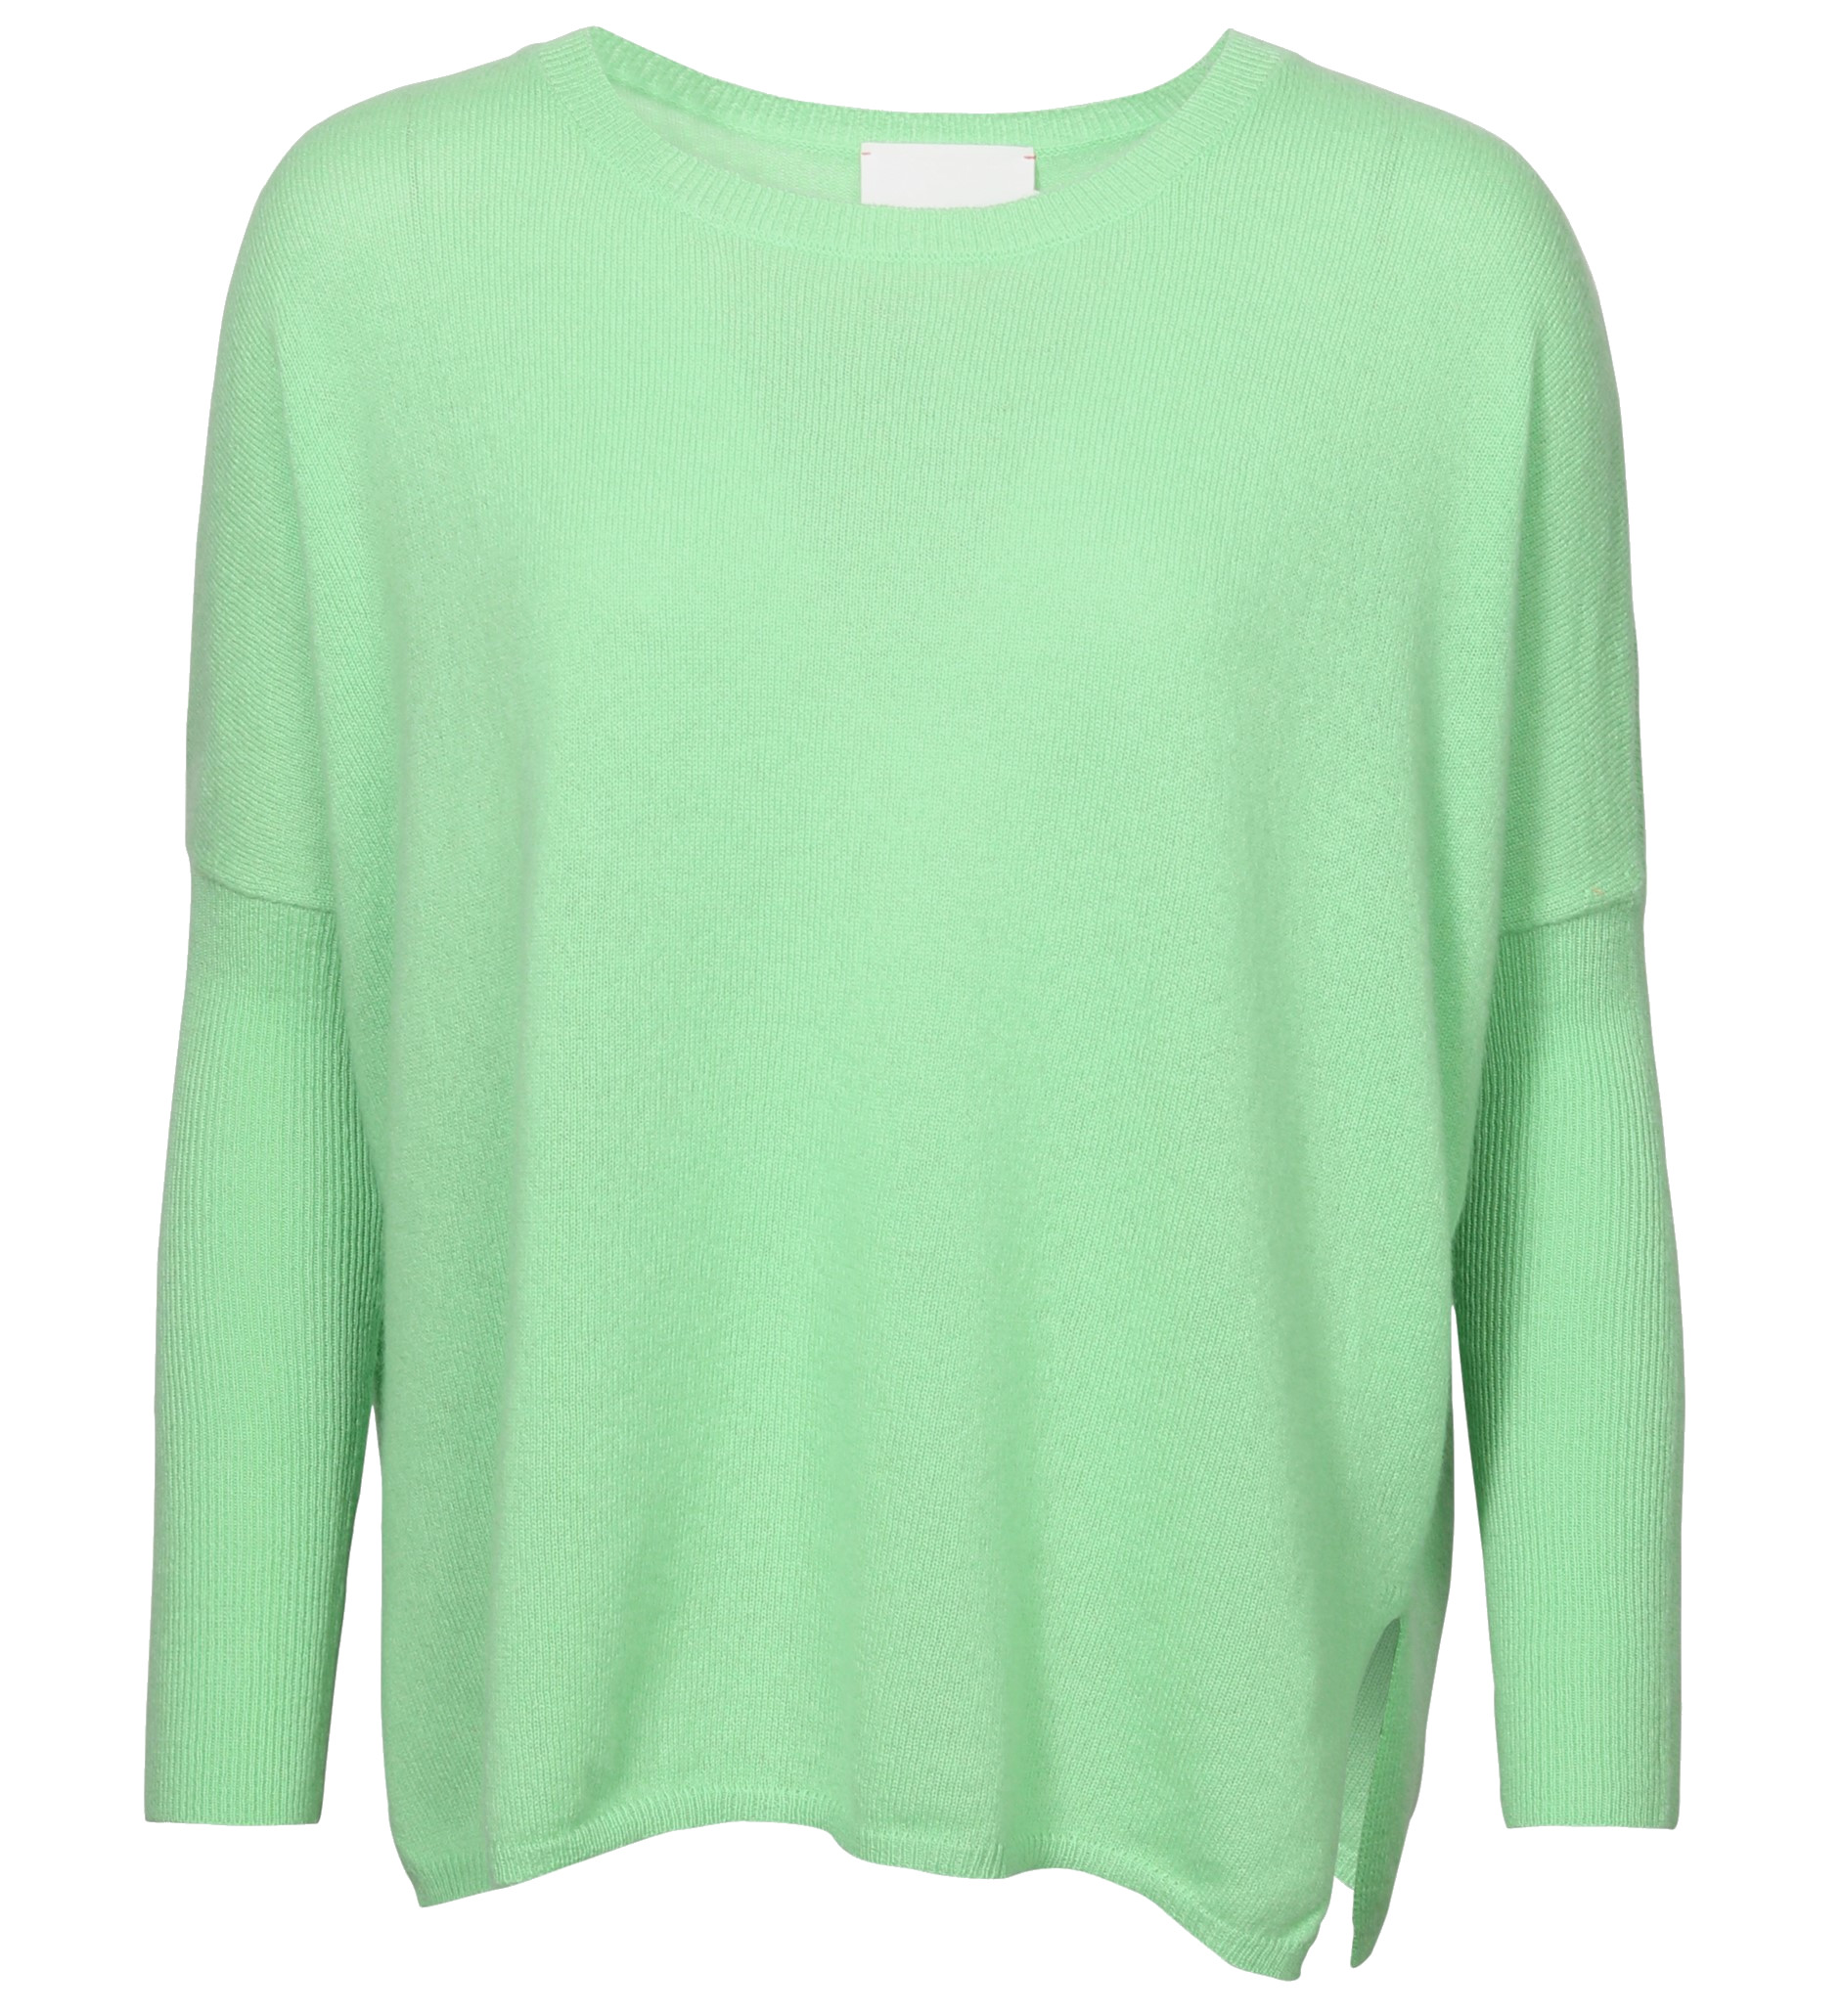 ABSOLUT CASHMERE Poncho Sweater Astrid in Light Green S